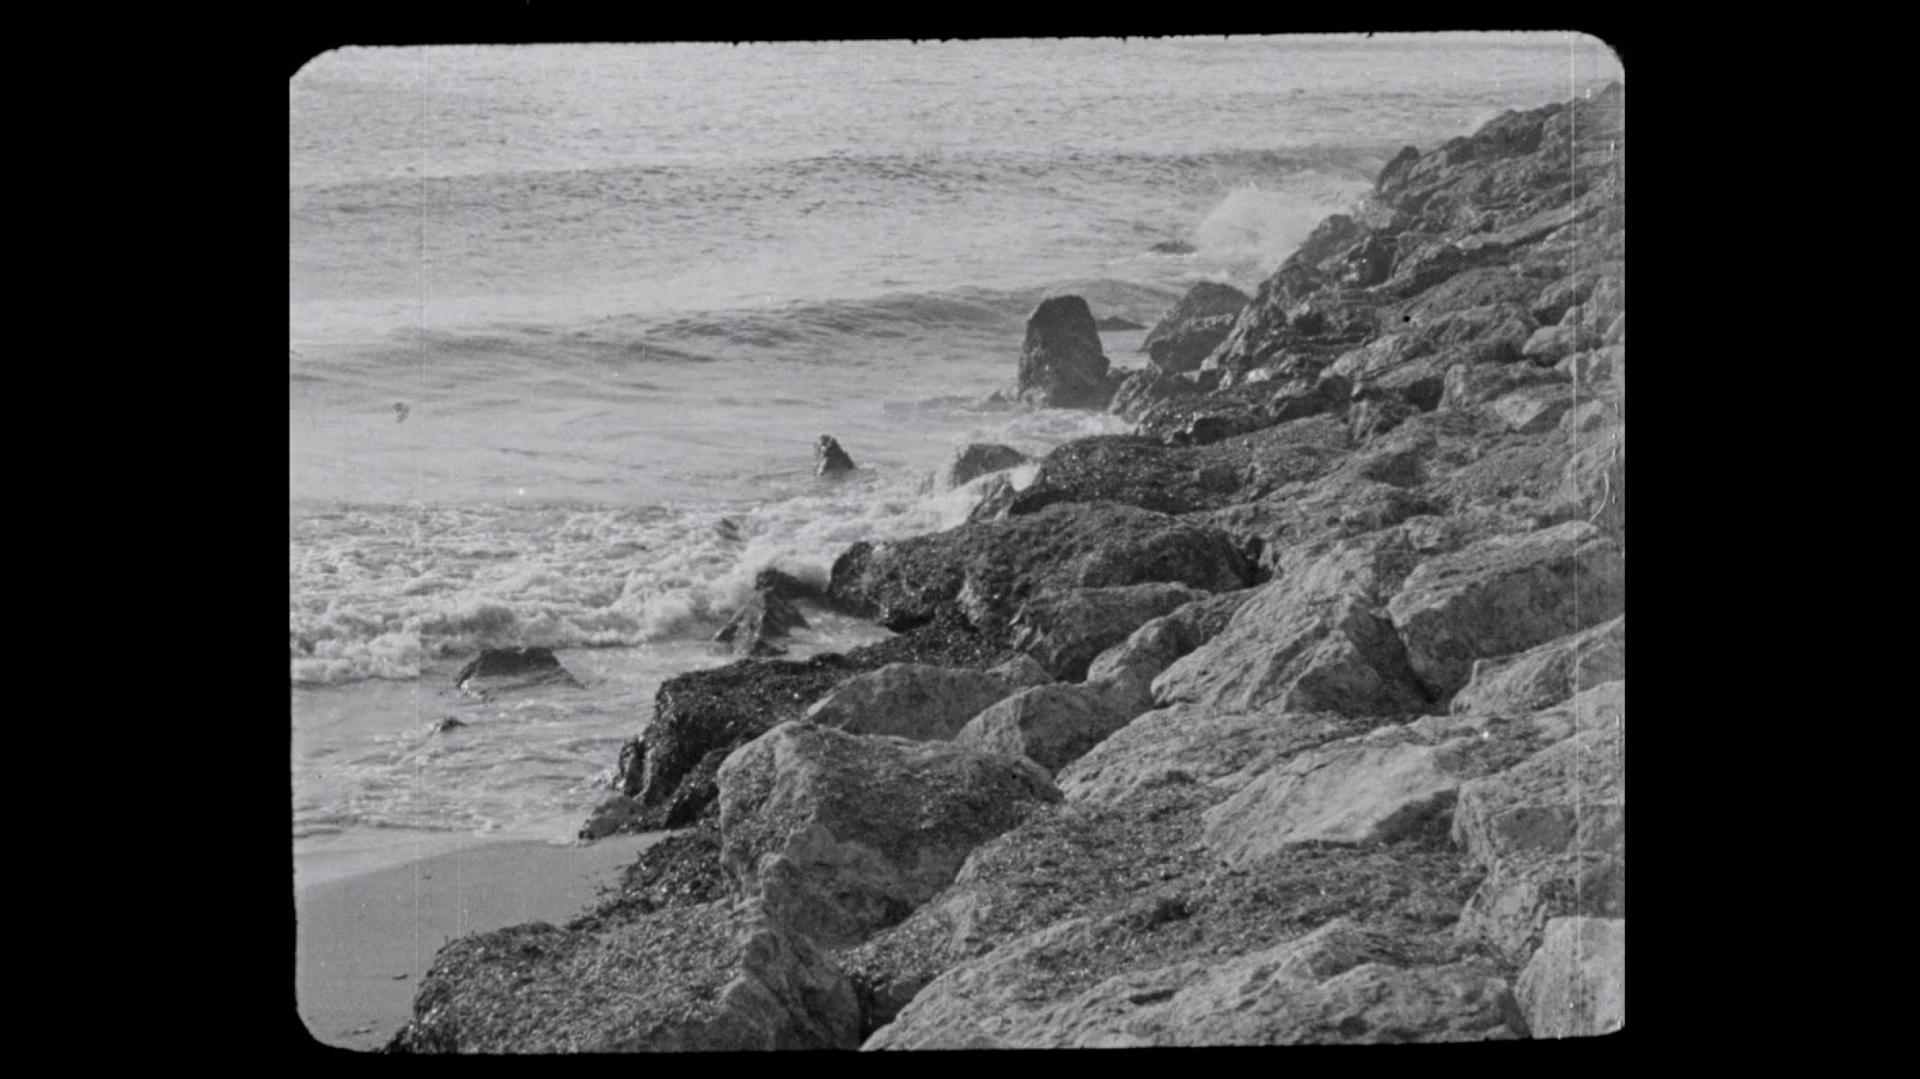 A seaside image from a black and white film. 